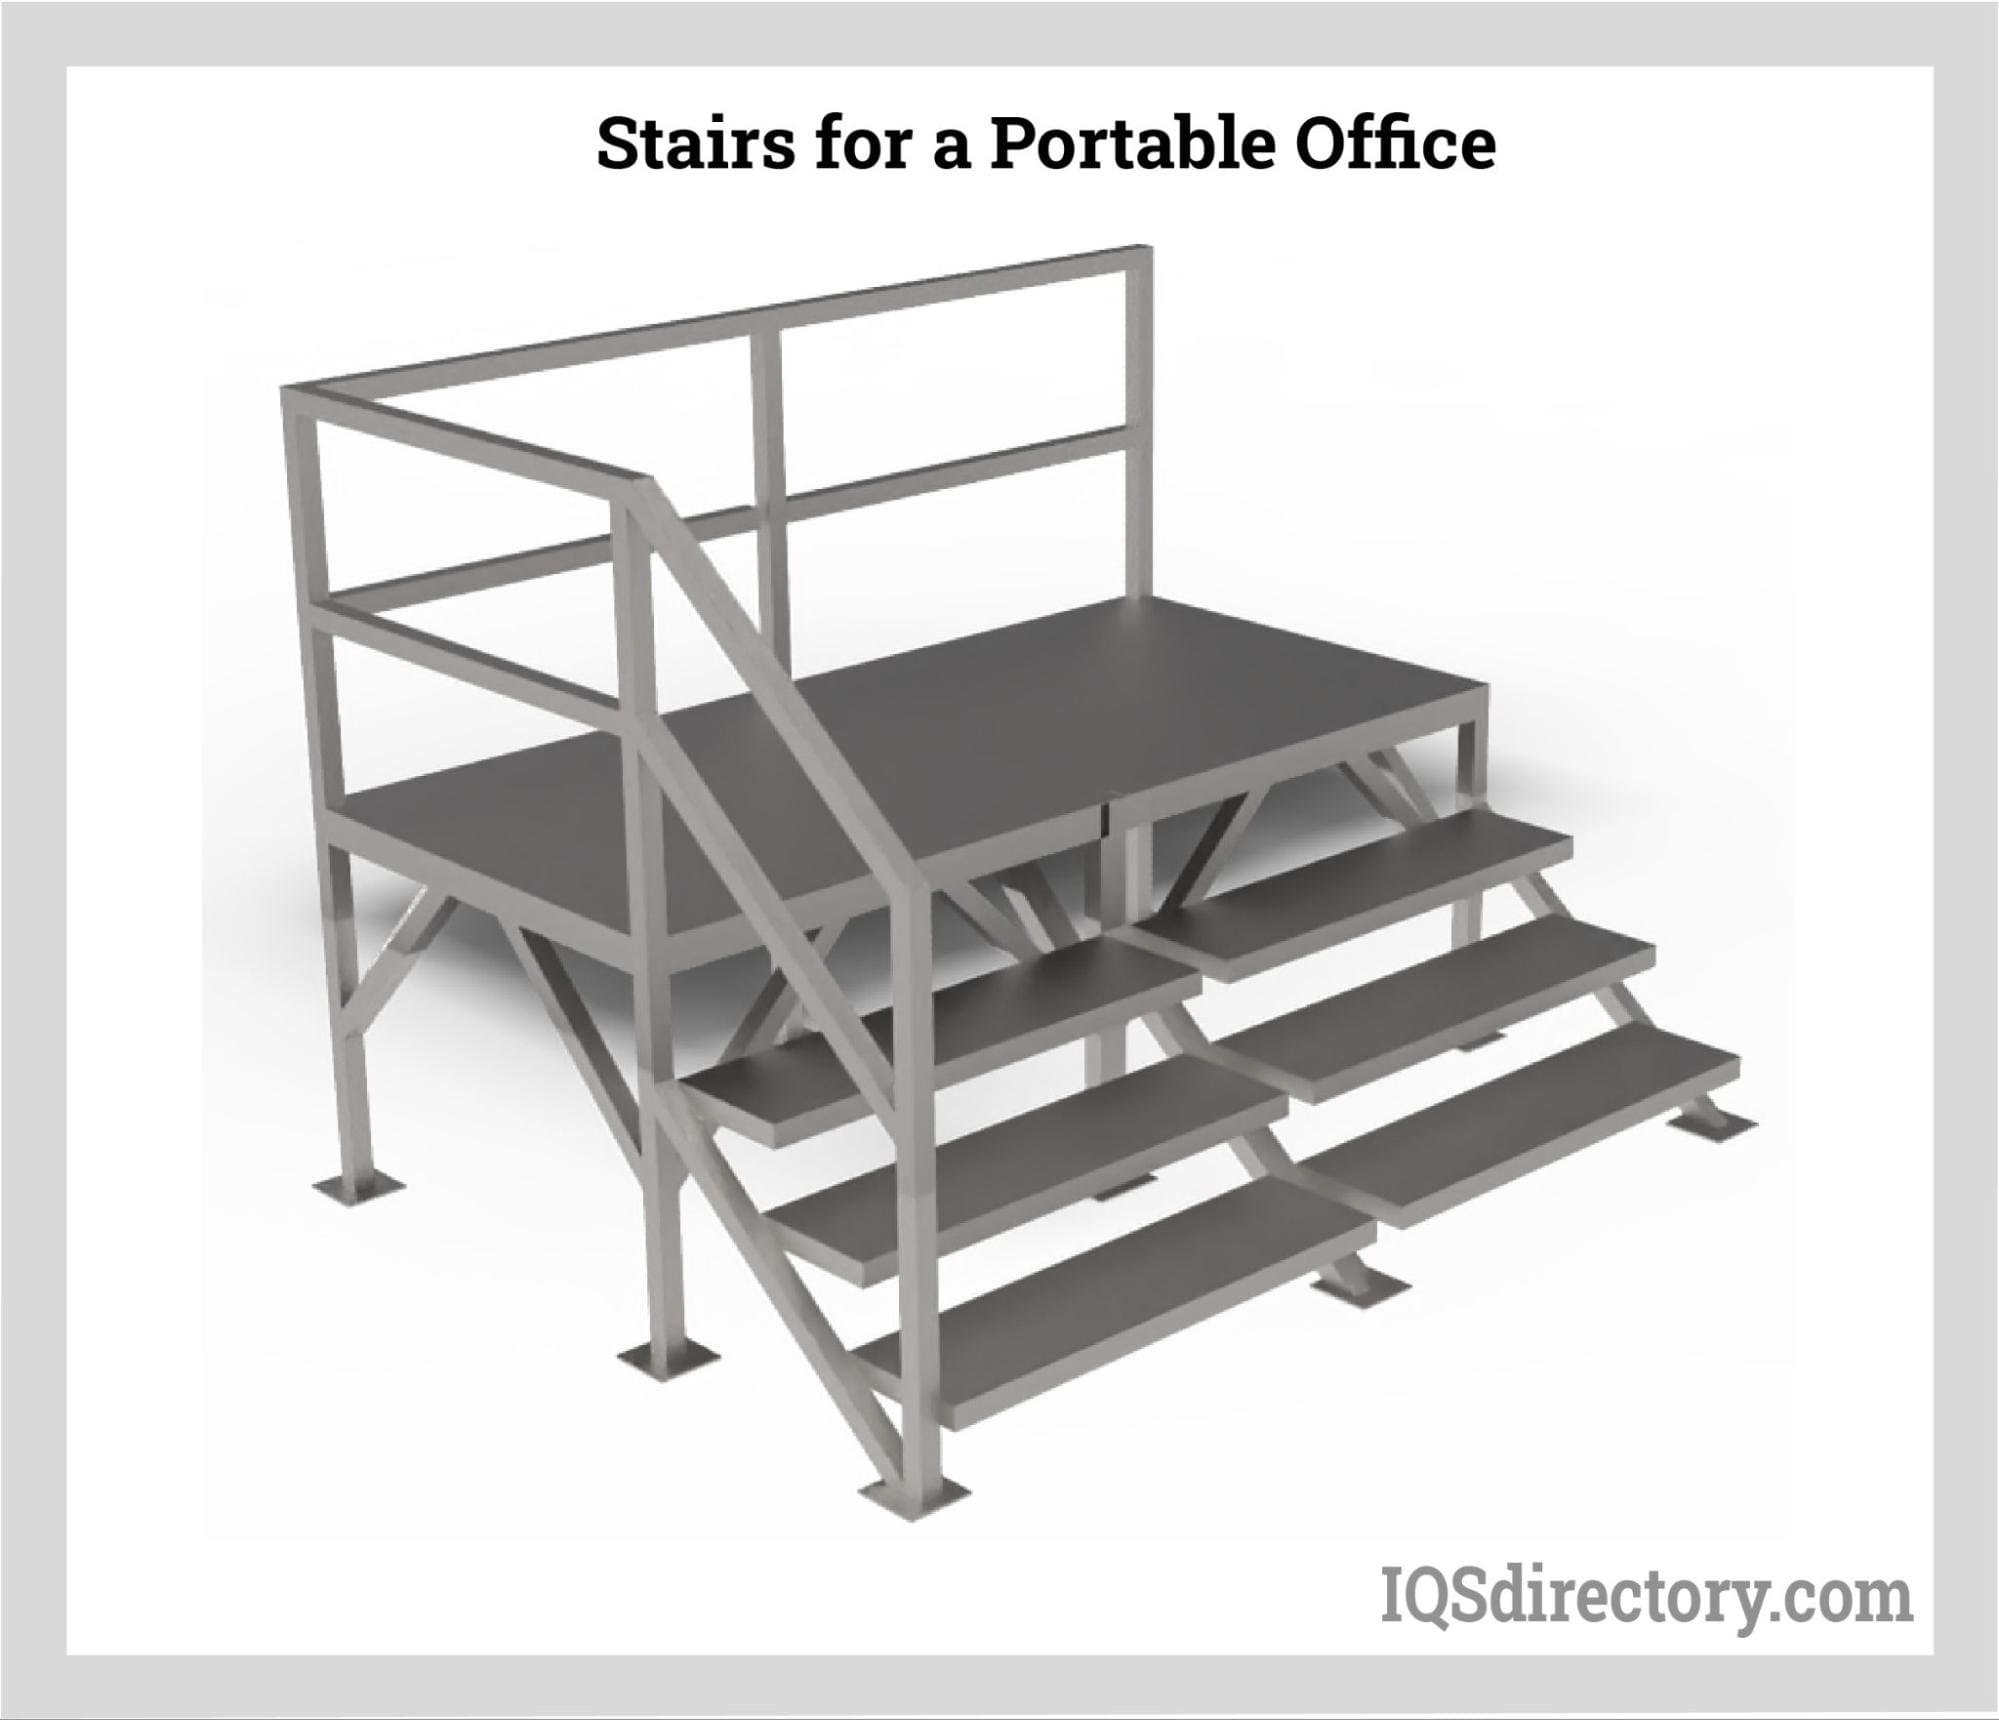 Stairs for a Portable Office